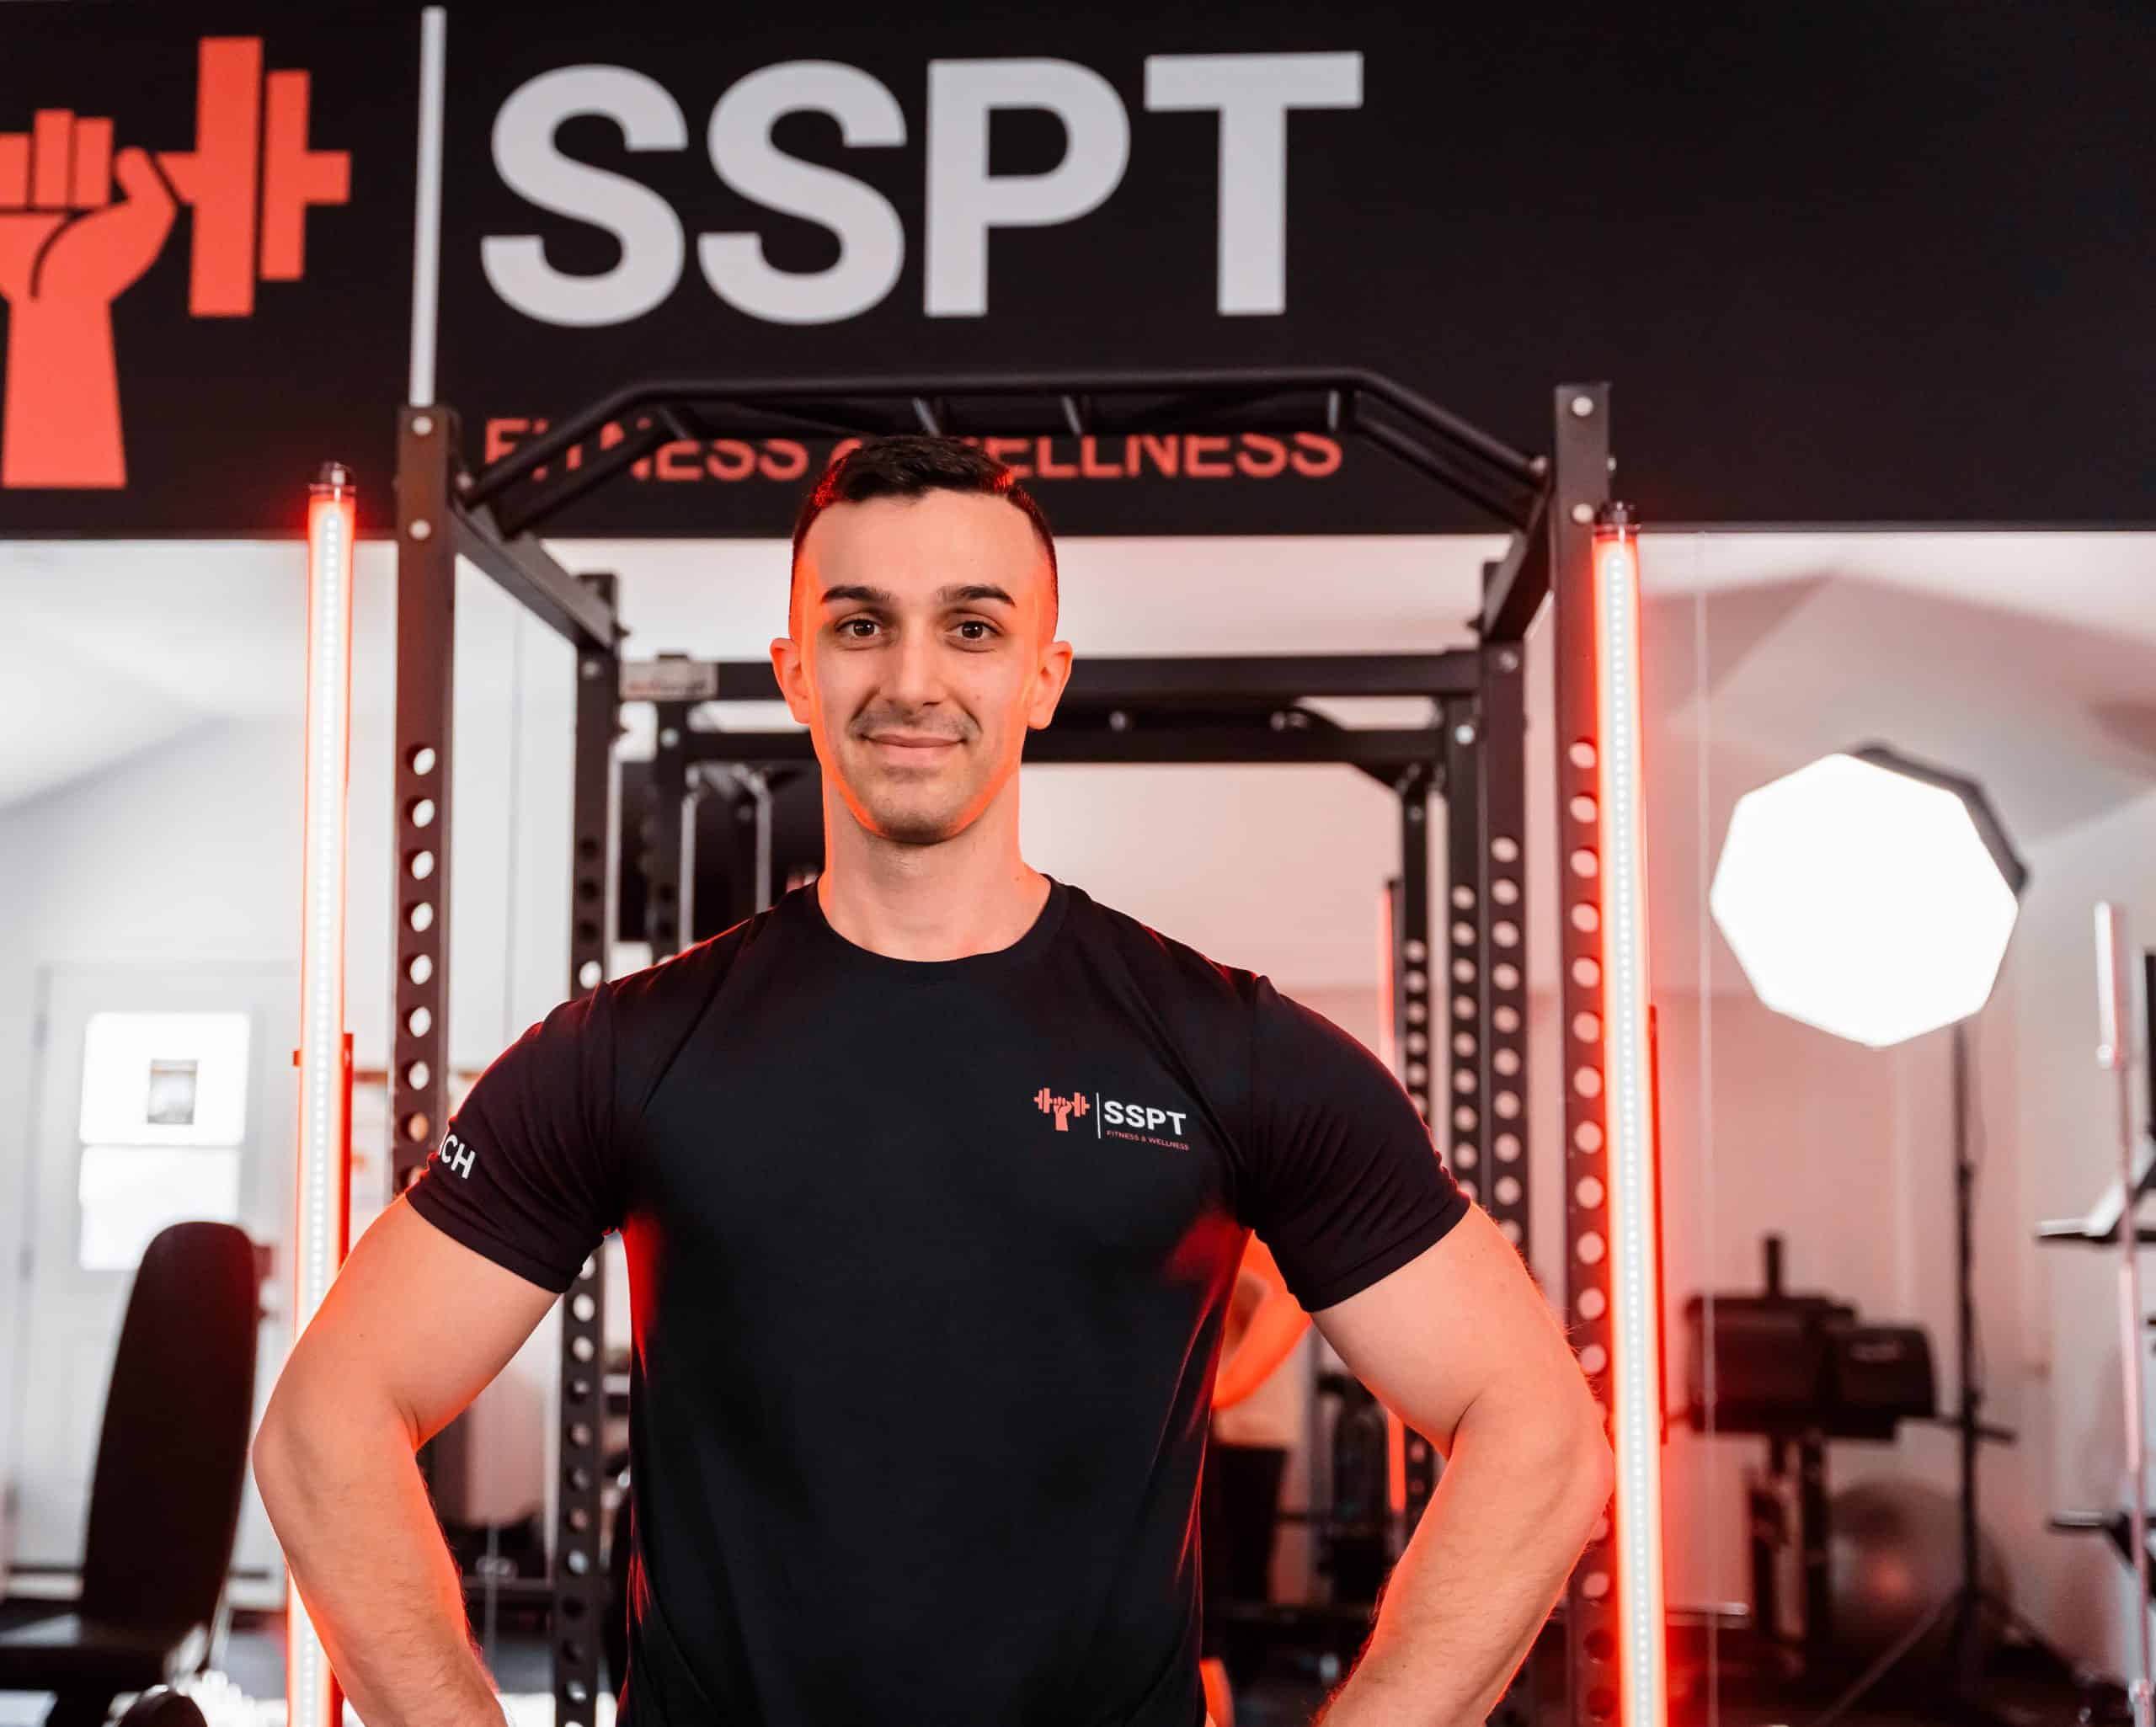 Scott Shaheen of Scott Shaheen Personal Training Fitness & Wellness. Specializing in personal training and fitness coaching, nutrition and lifestyle coaching, and pain management techniques such as fascial stretch therapy, red light therapy, cupping therapy and gua sha scraping therapy. Located in Woodstock Ontario.